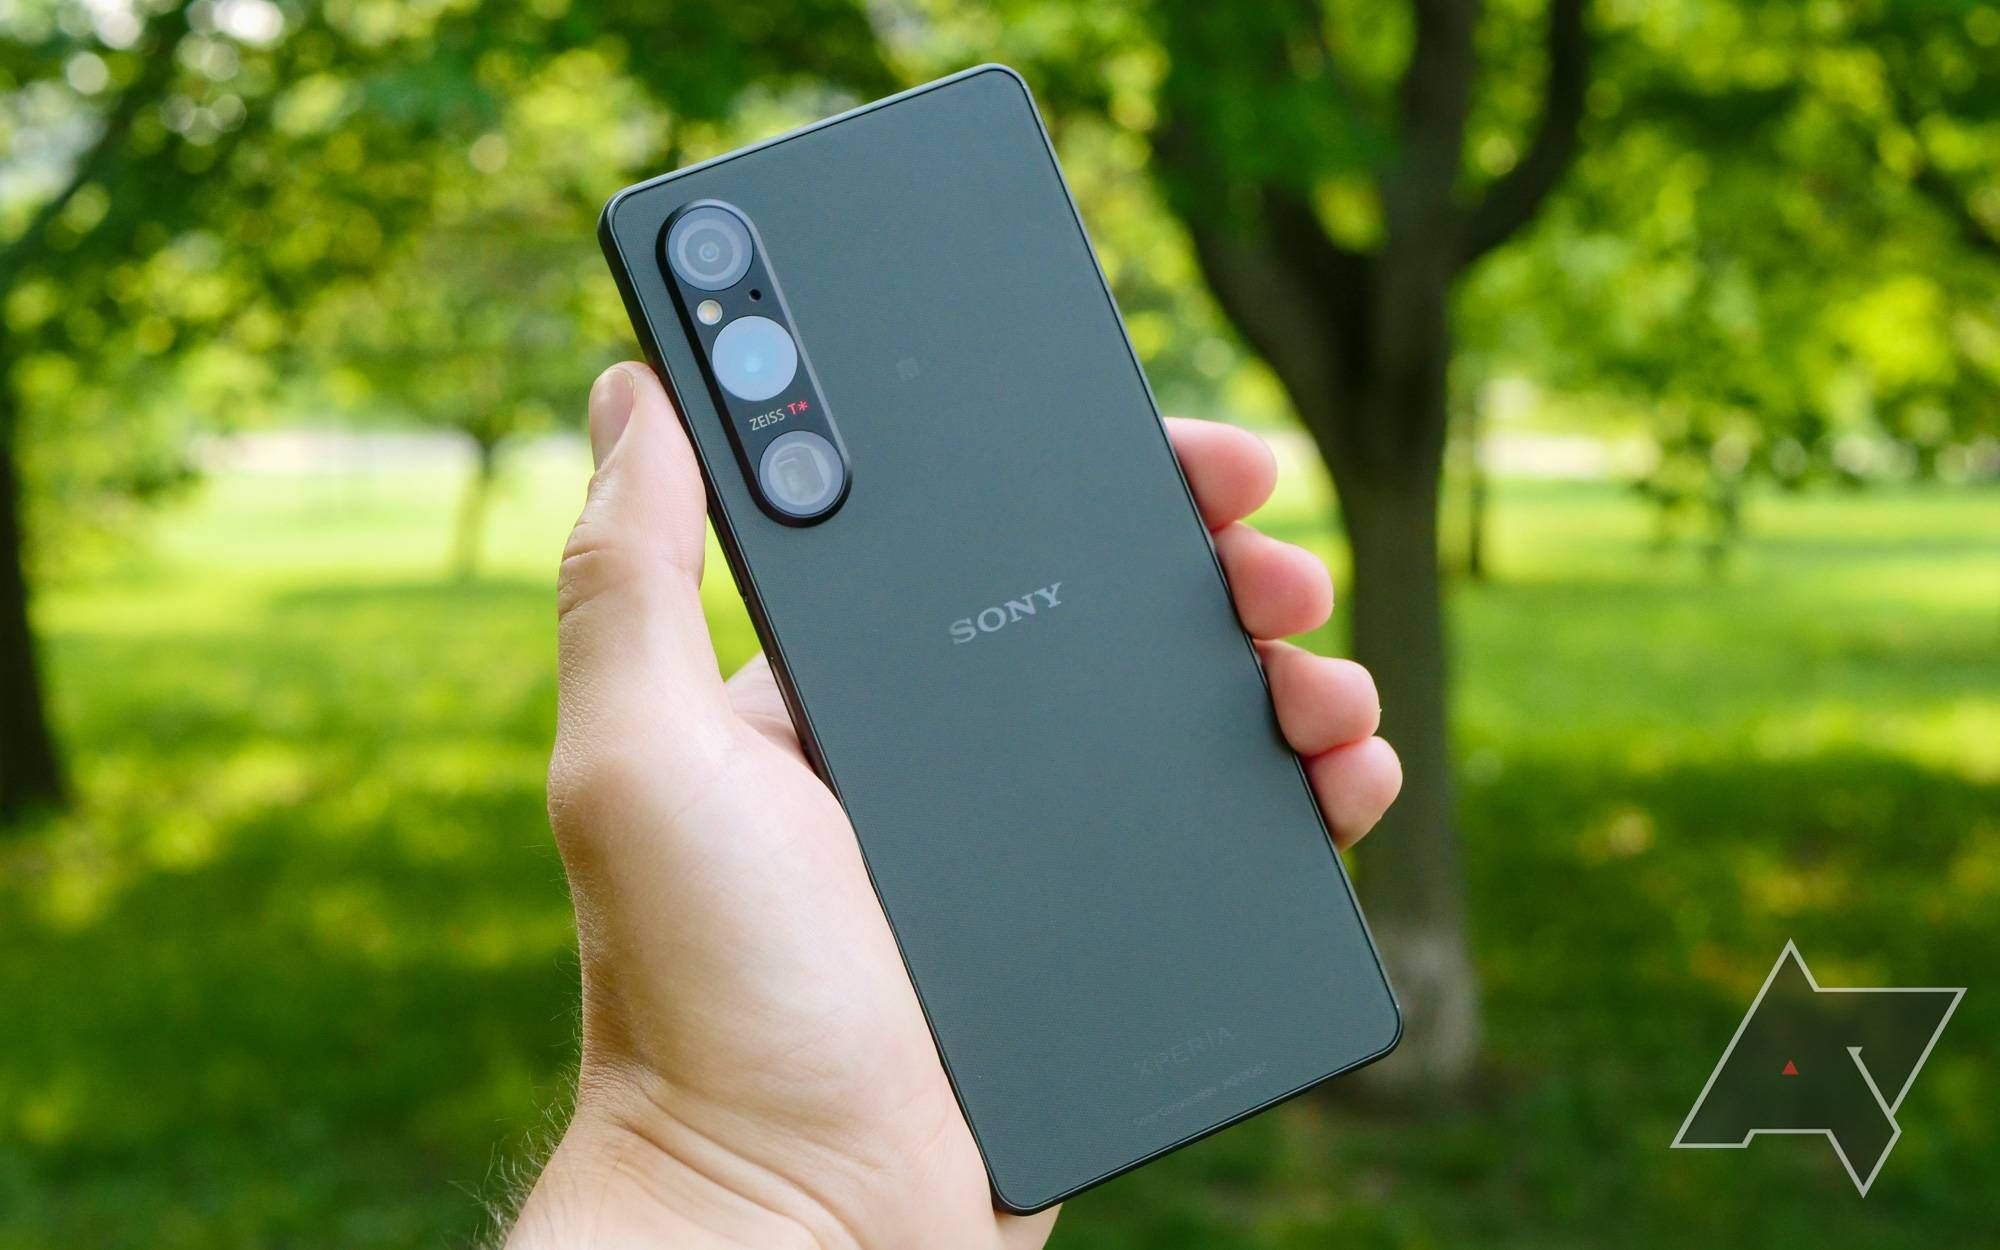 Sony Xperia 5 V: New compact flagship launches with Snapdragon 8 Gen 2,  5,000 mAh battery and 48 MP camera from Xperia 1 V -  News